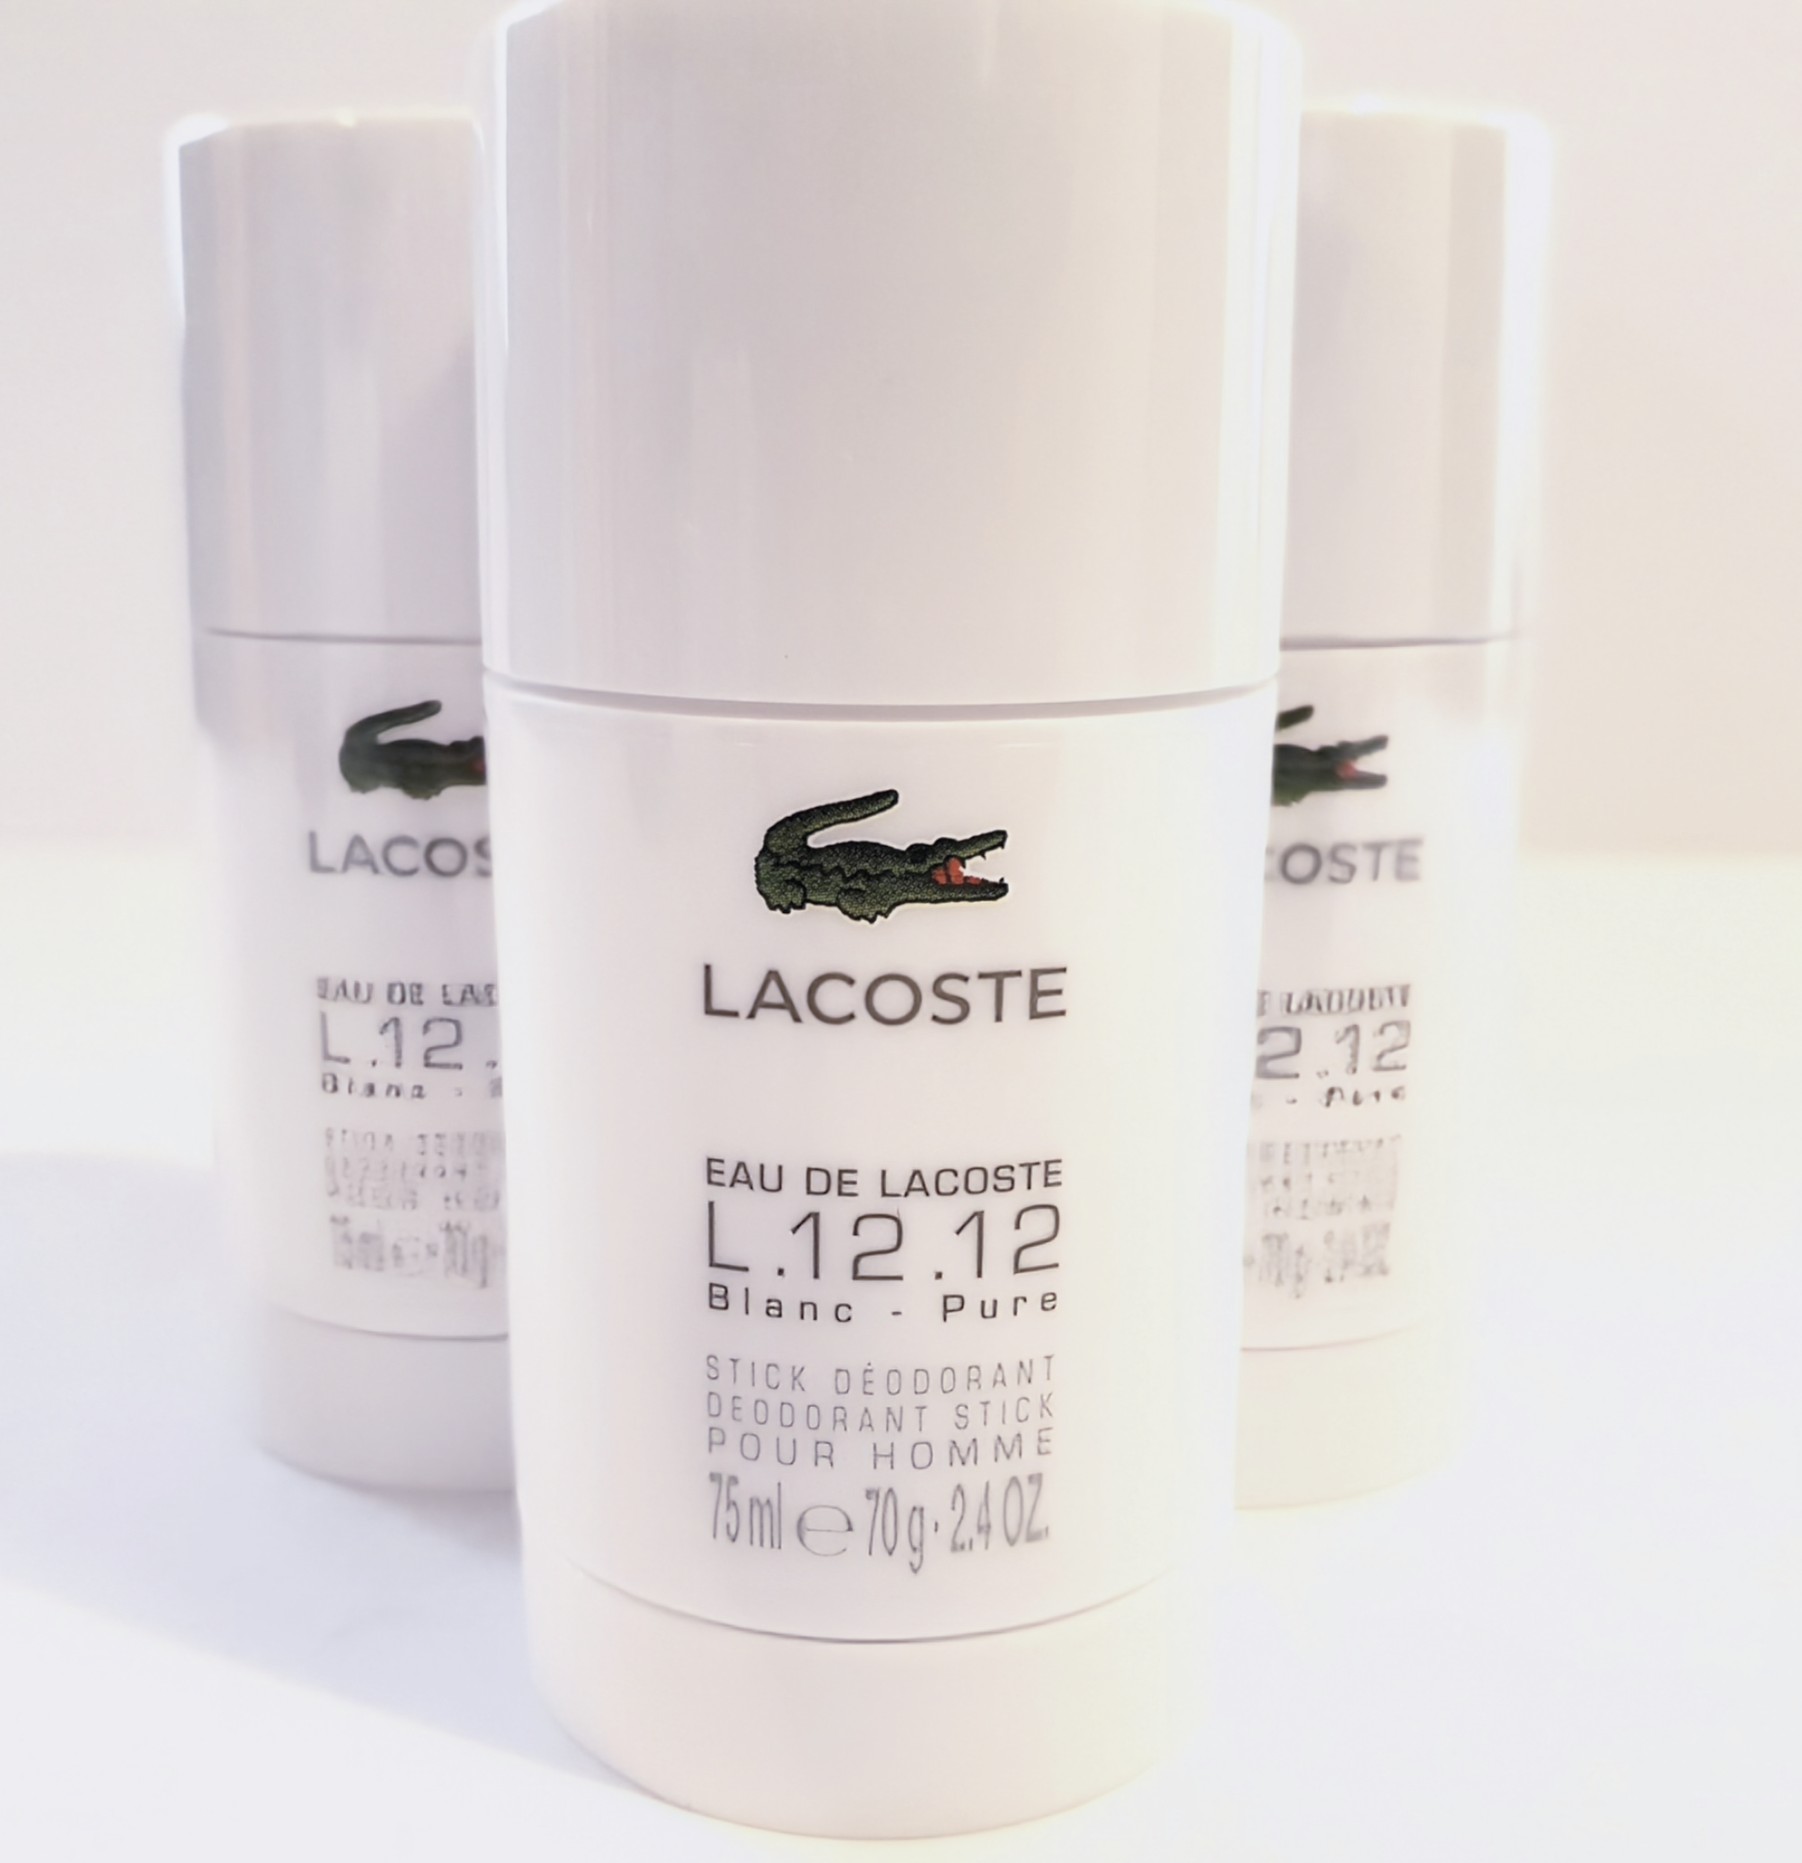 Three white Lacoste L.12.12 Blanc Pure deodorant stick containers are displayed, each holding 75 ml (2.4 oz). The containers have a green crocodile logo and product details written in black text.